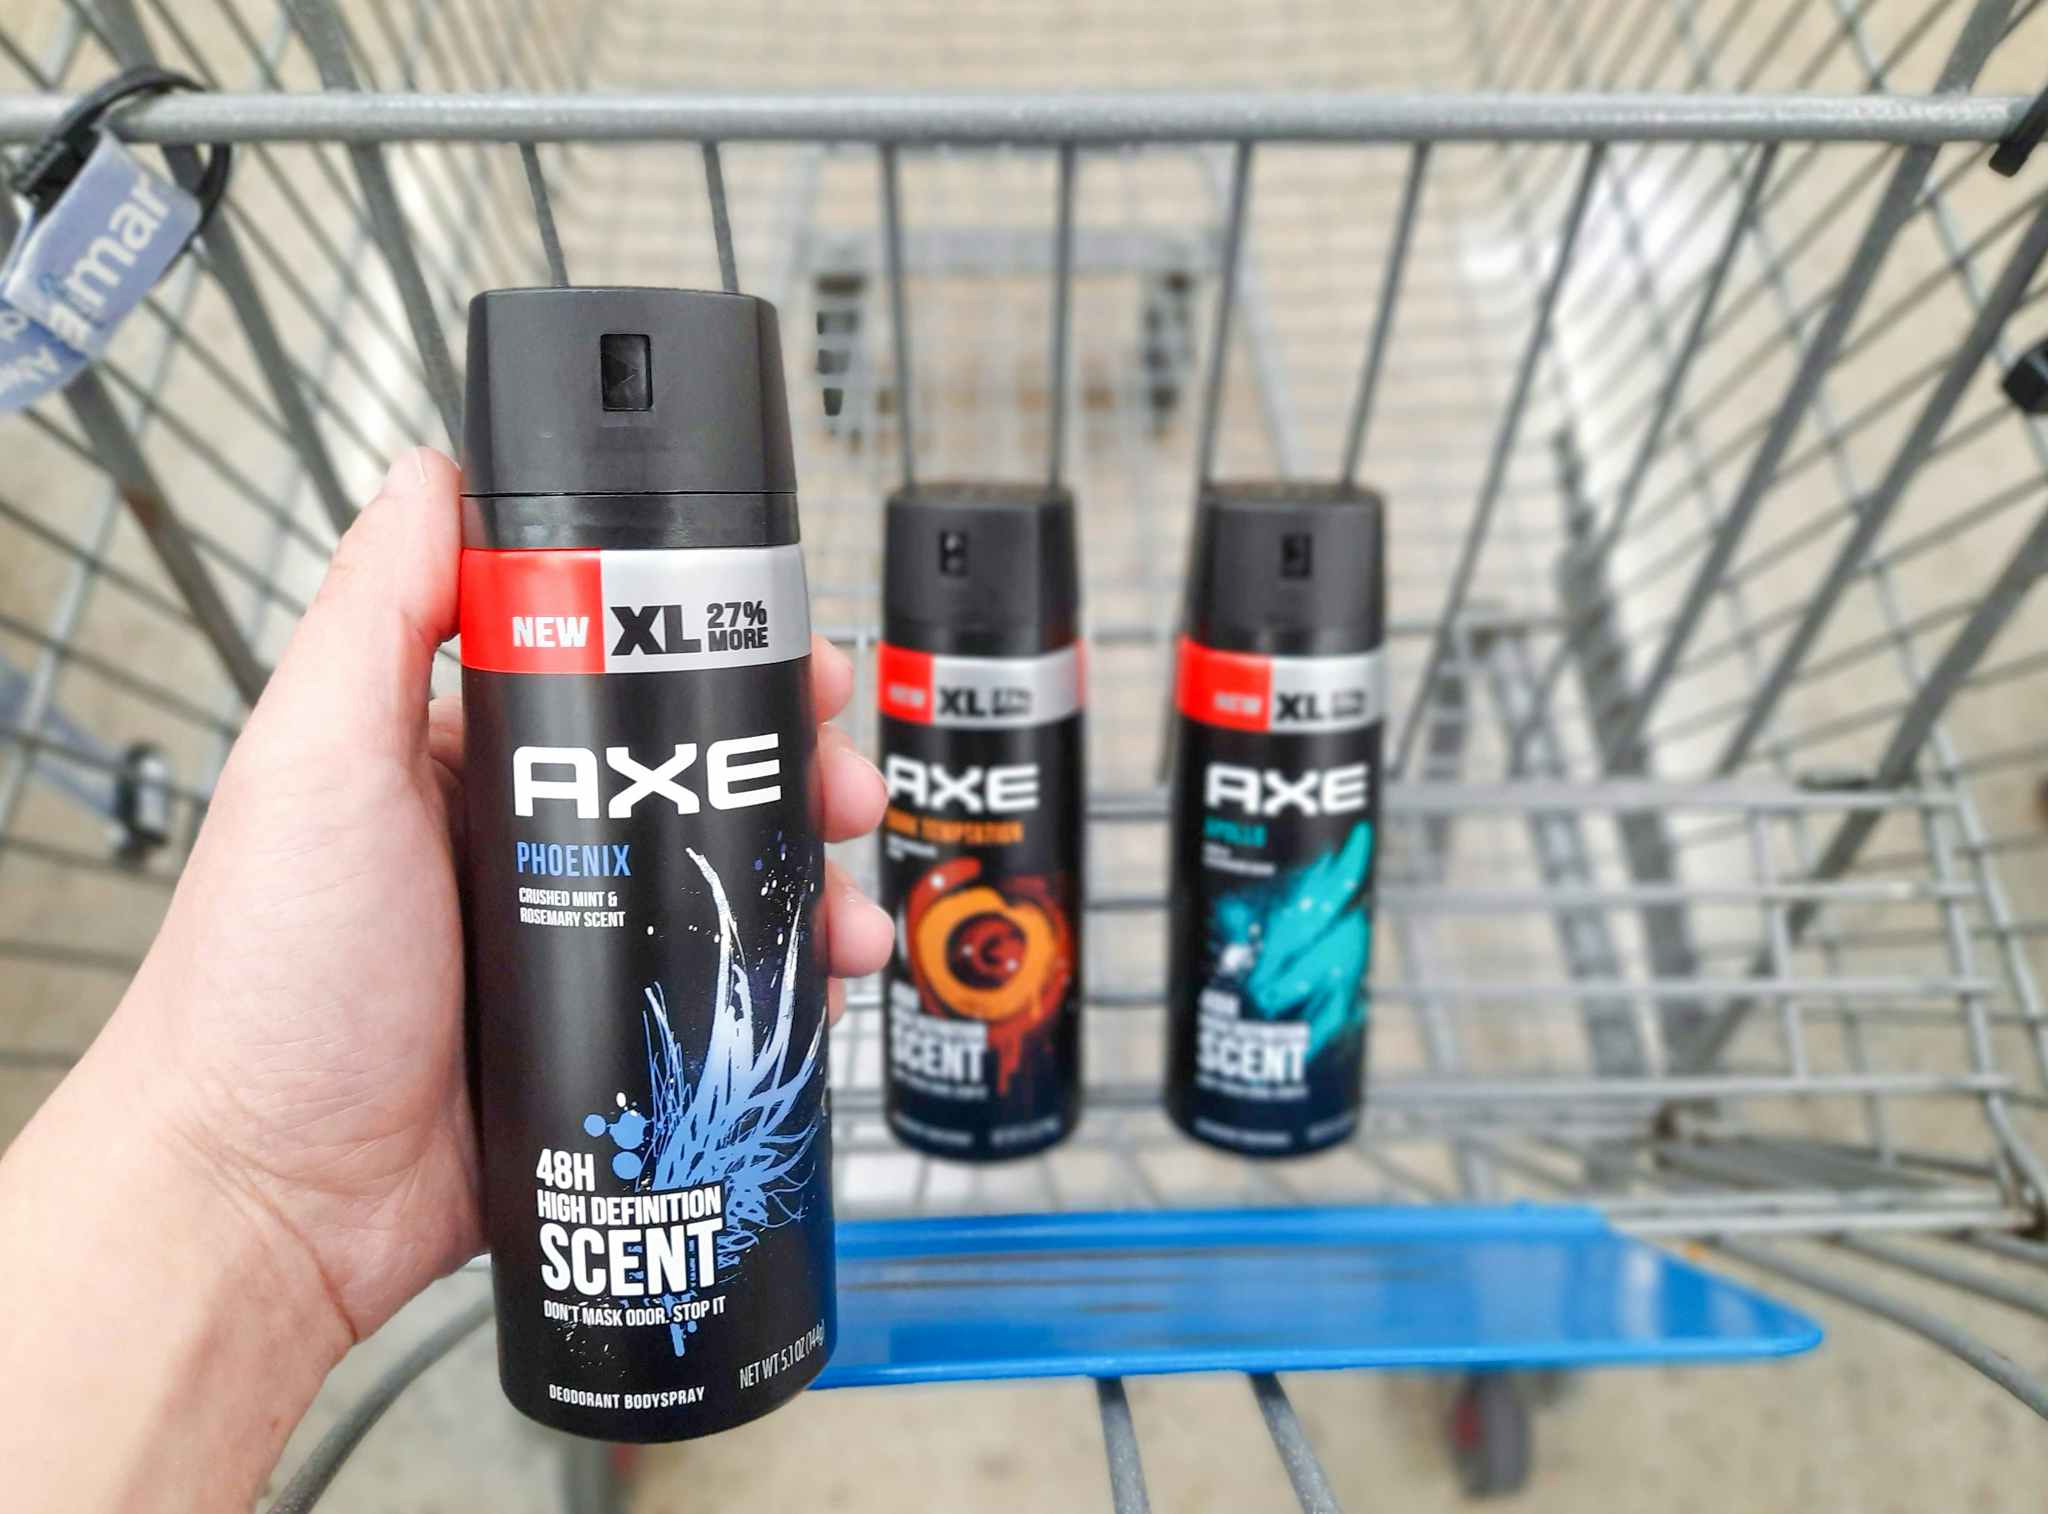 Hand holding one Axe Deodorant Body Spray product over Walmart shopping cart. Shopping cart has two Axe Deodorant Body Spray products in it.